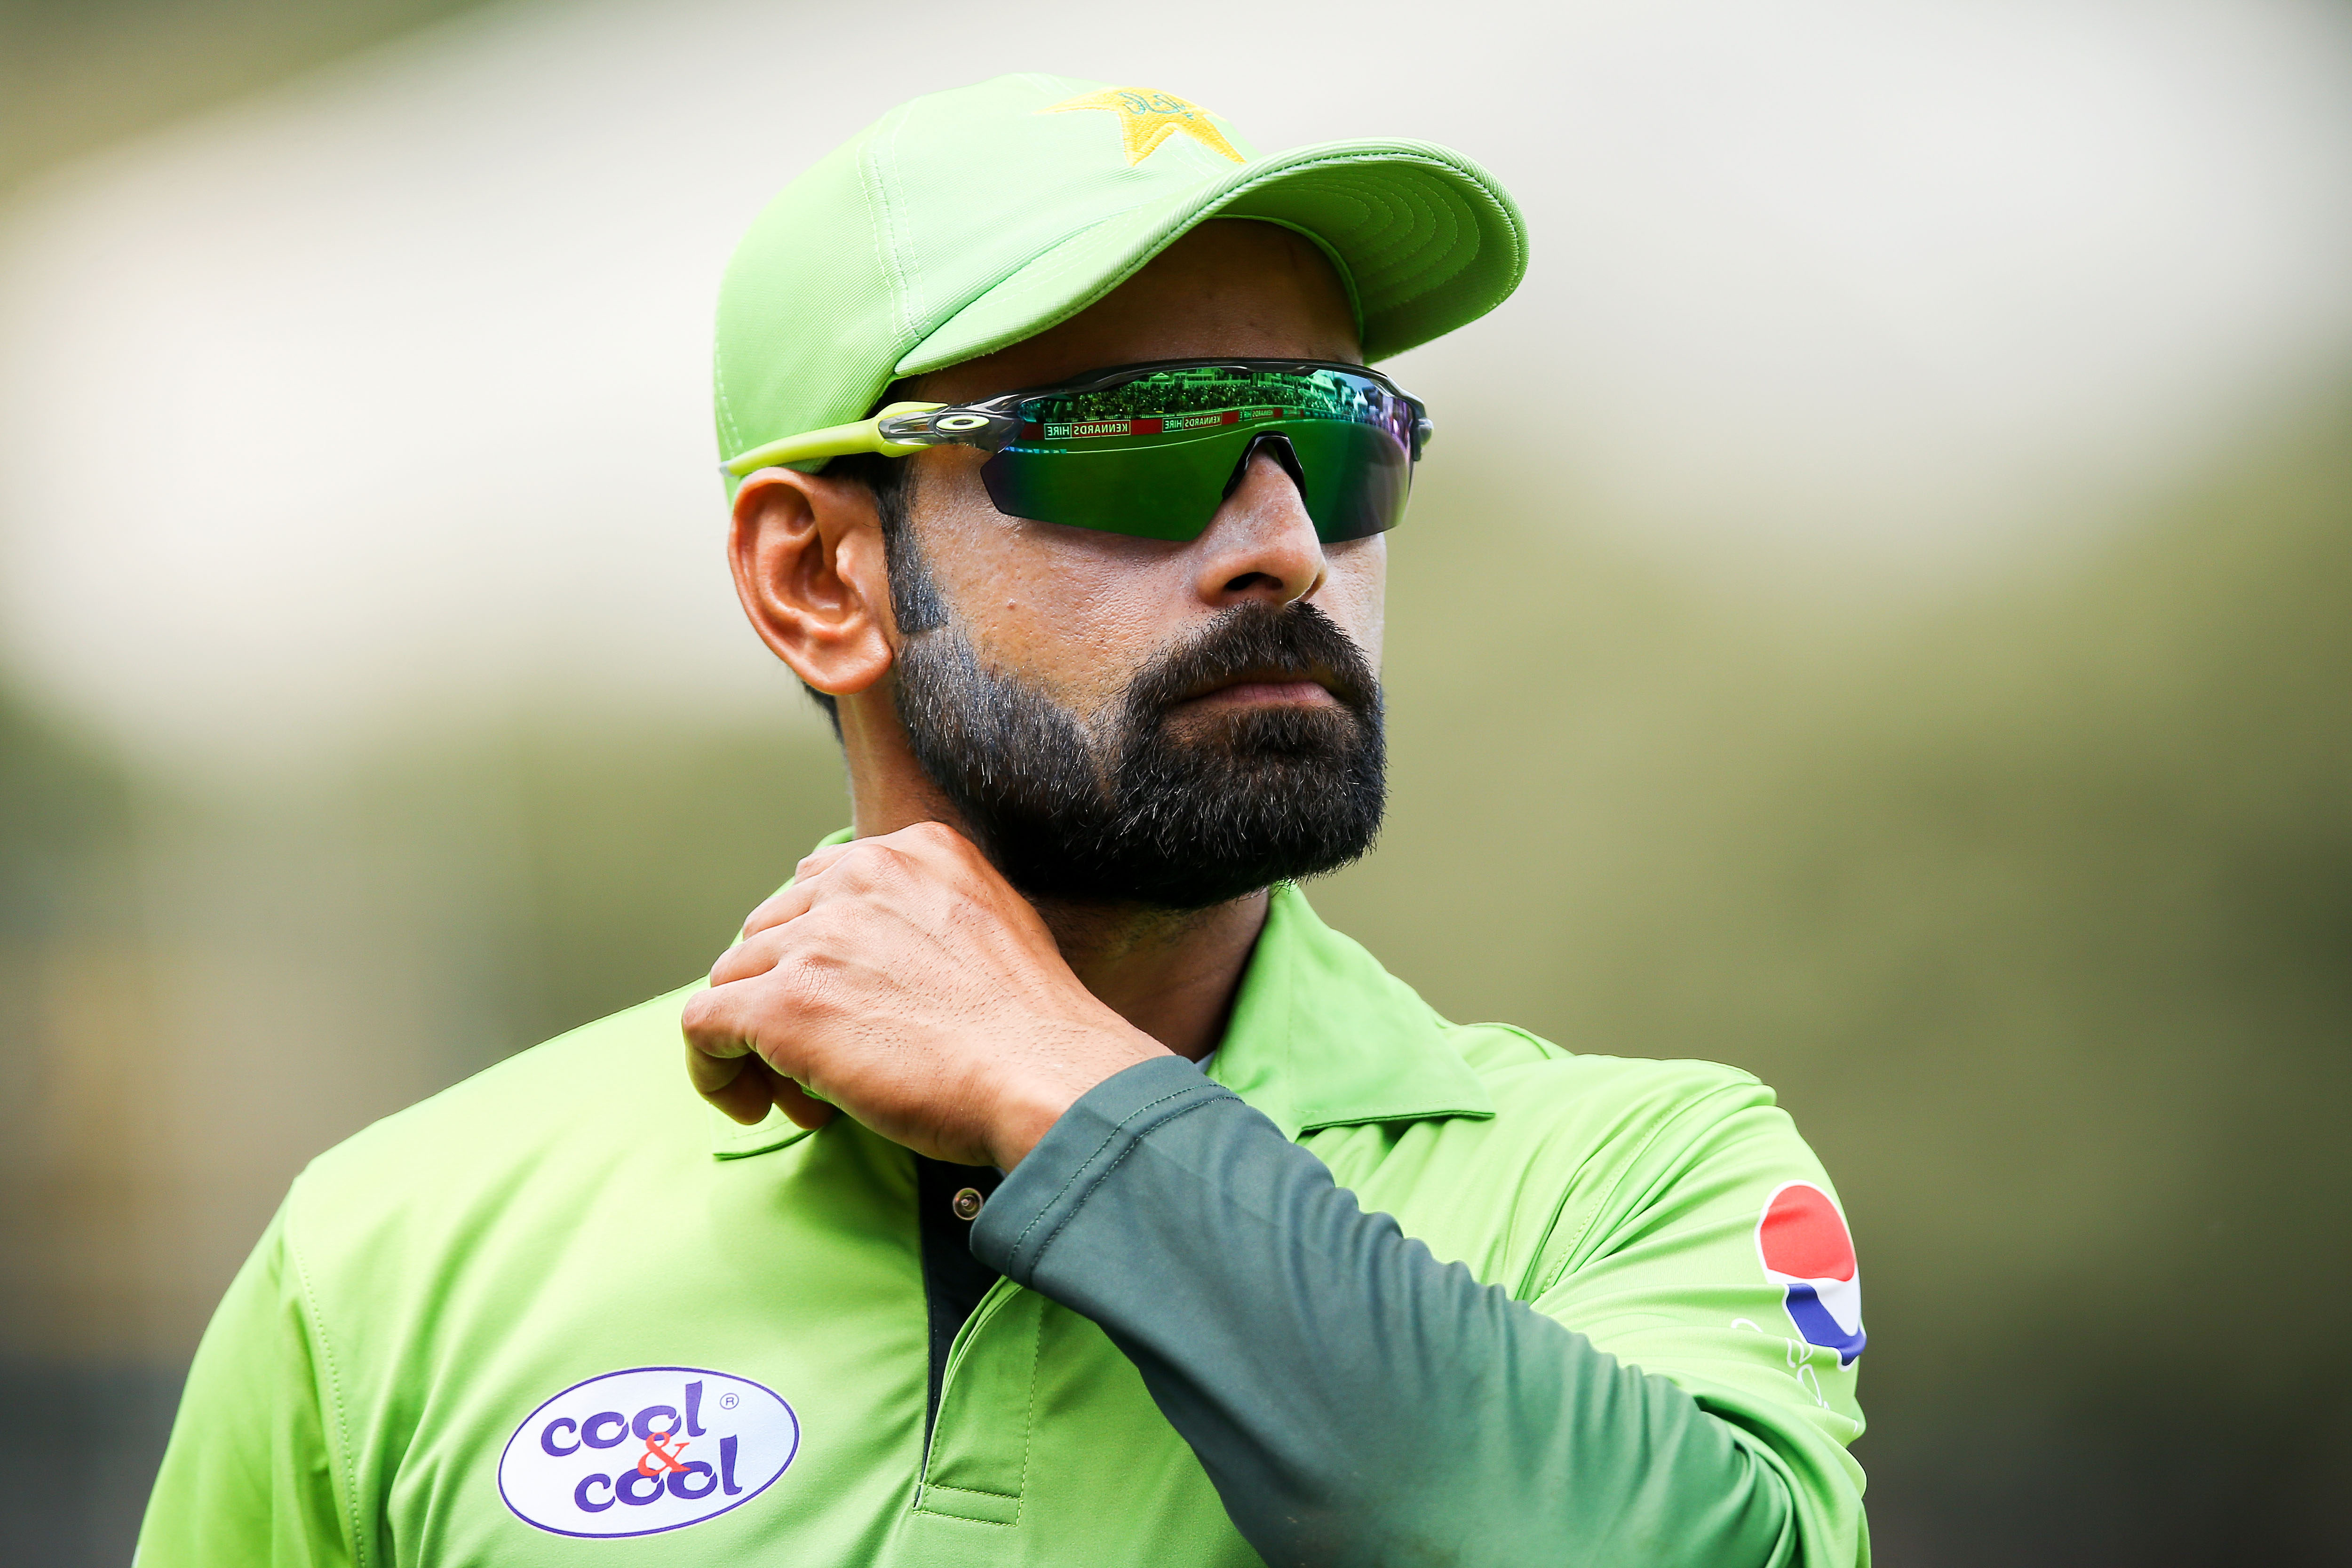 PCB allowing Sharjeel Khan back shows they prefer talent over dignity, claims Mohammad Hafeez